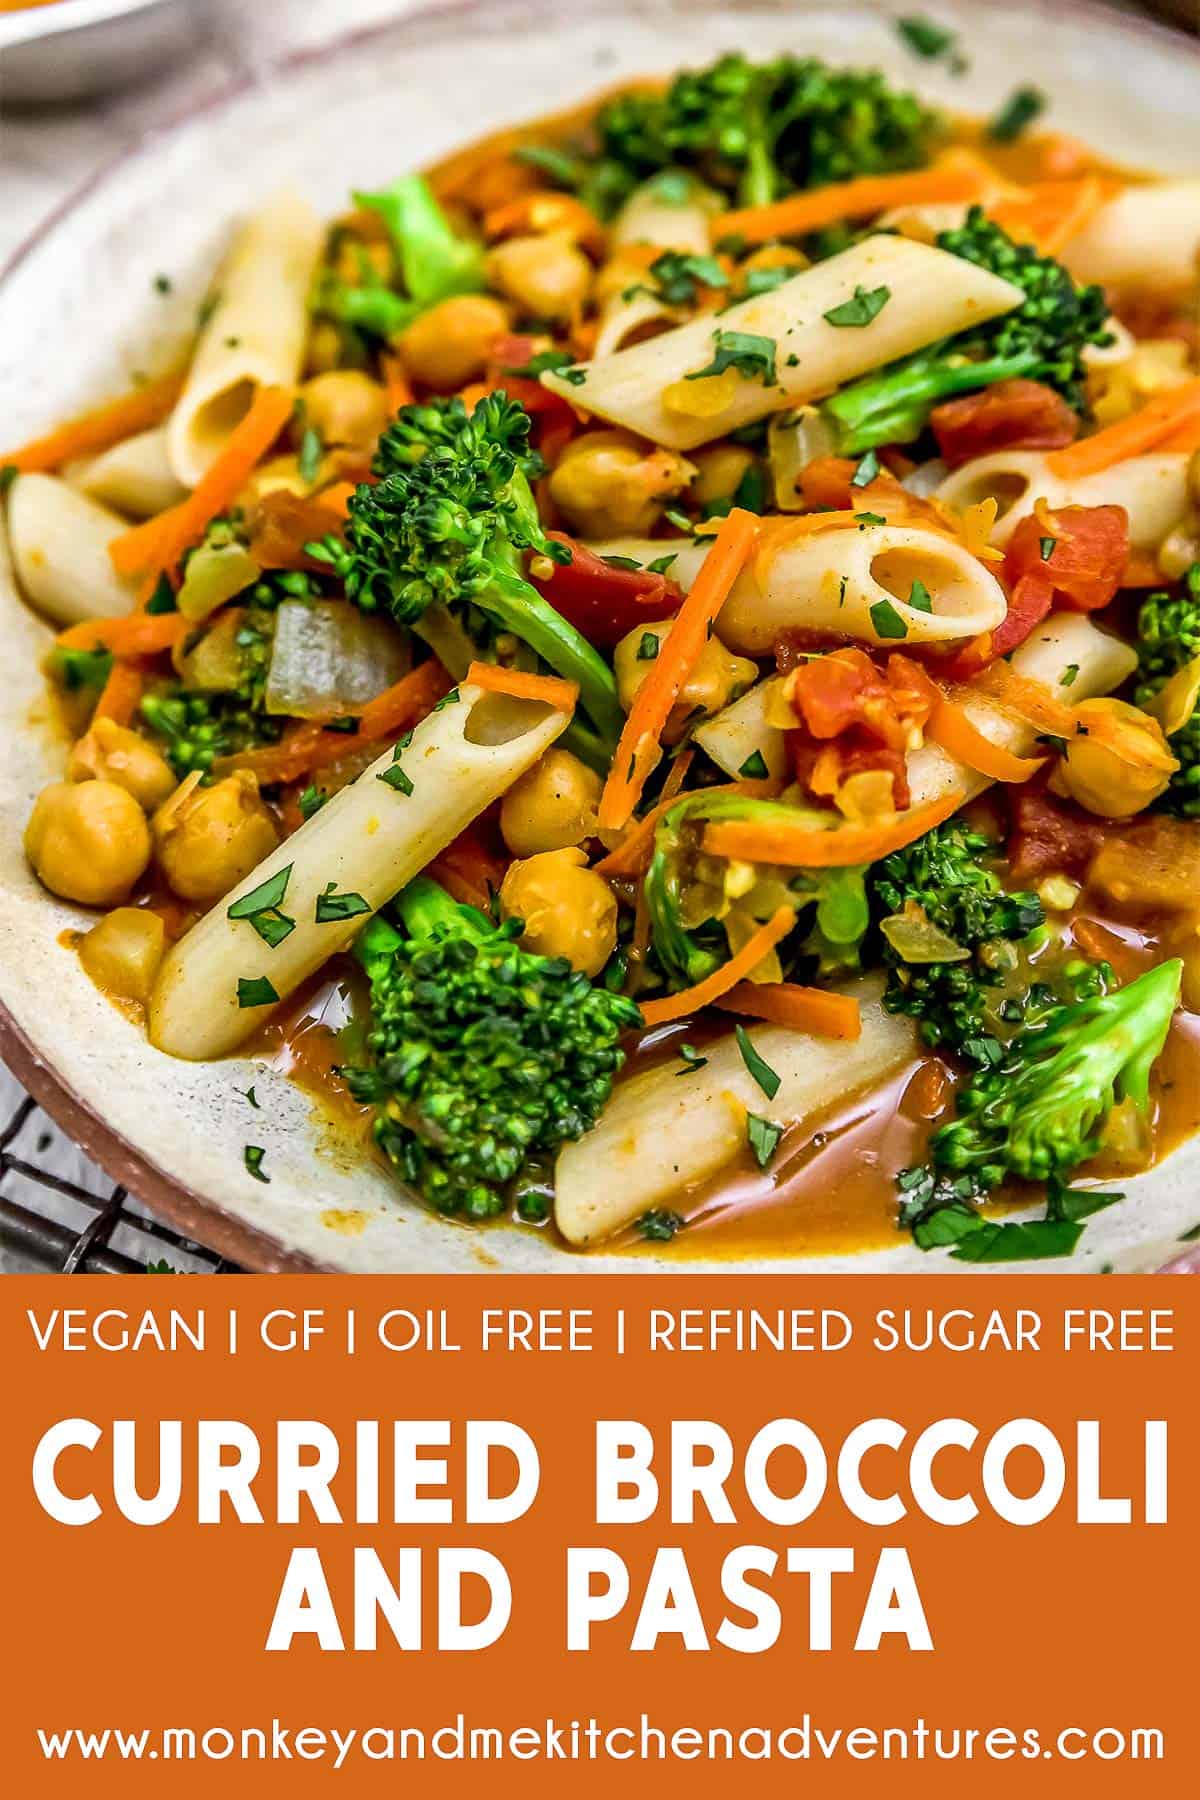 Curry Broccoli and Pasta with text description